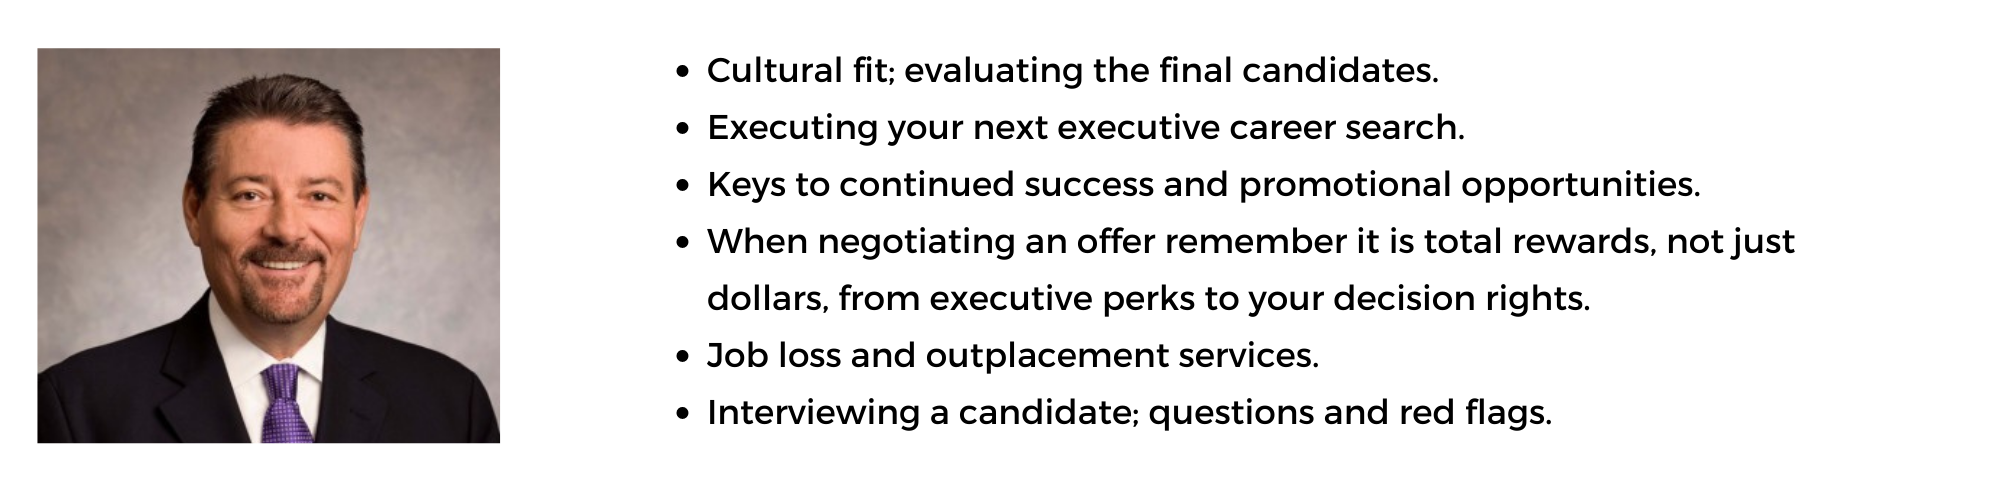 Robert Jones | How to Successfully Secure Your Next Executive Role: Search, Interview, and Negotiation Tips from a Chief Administrative Officer